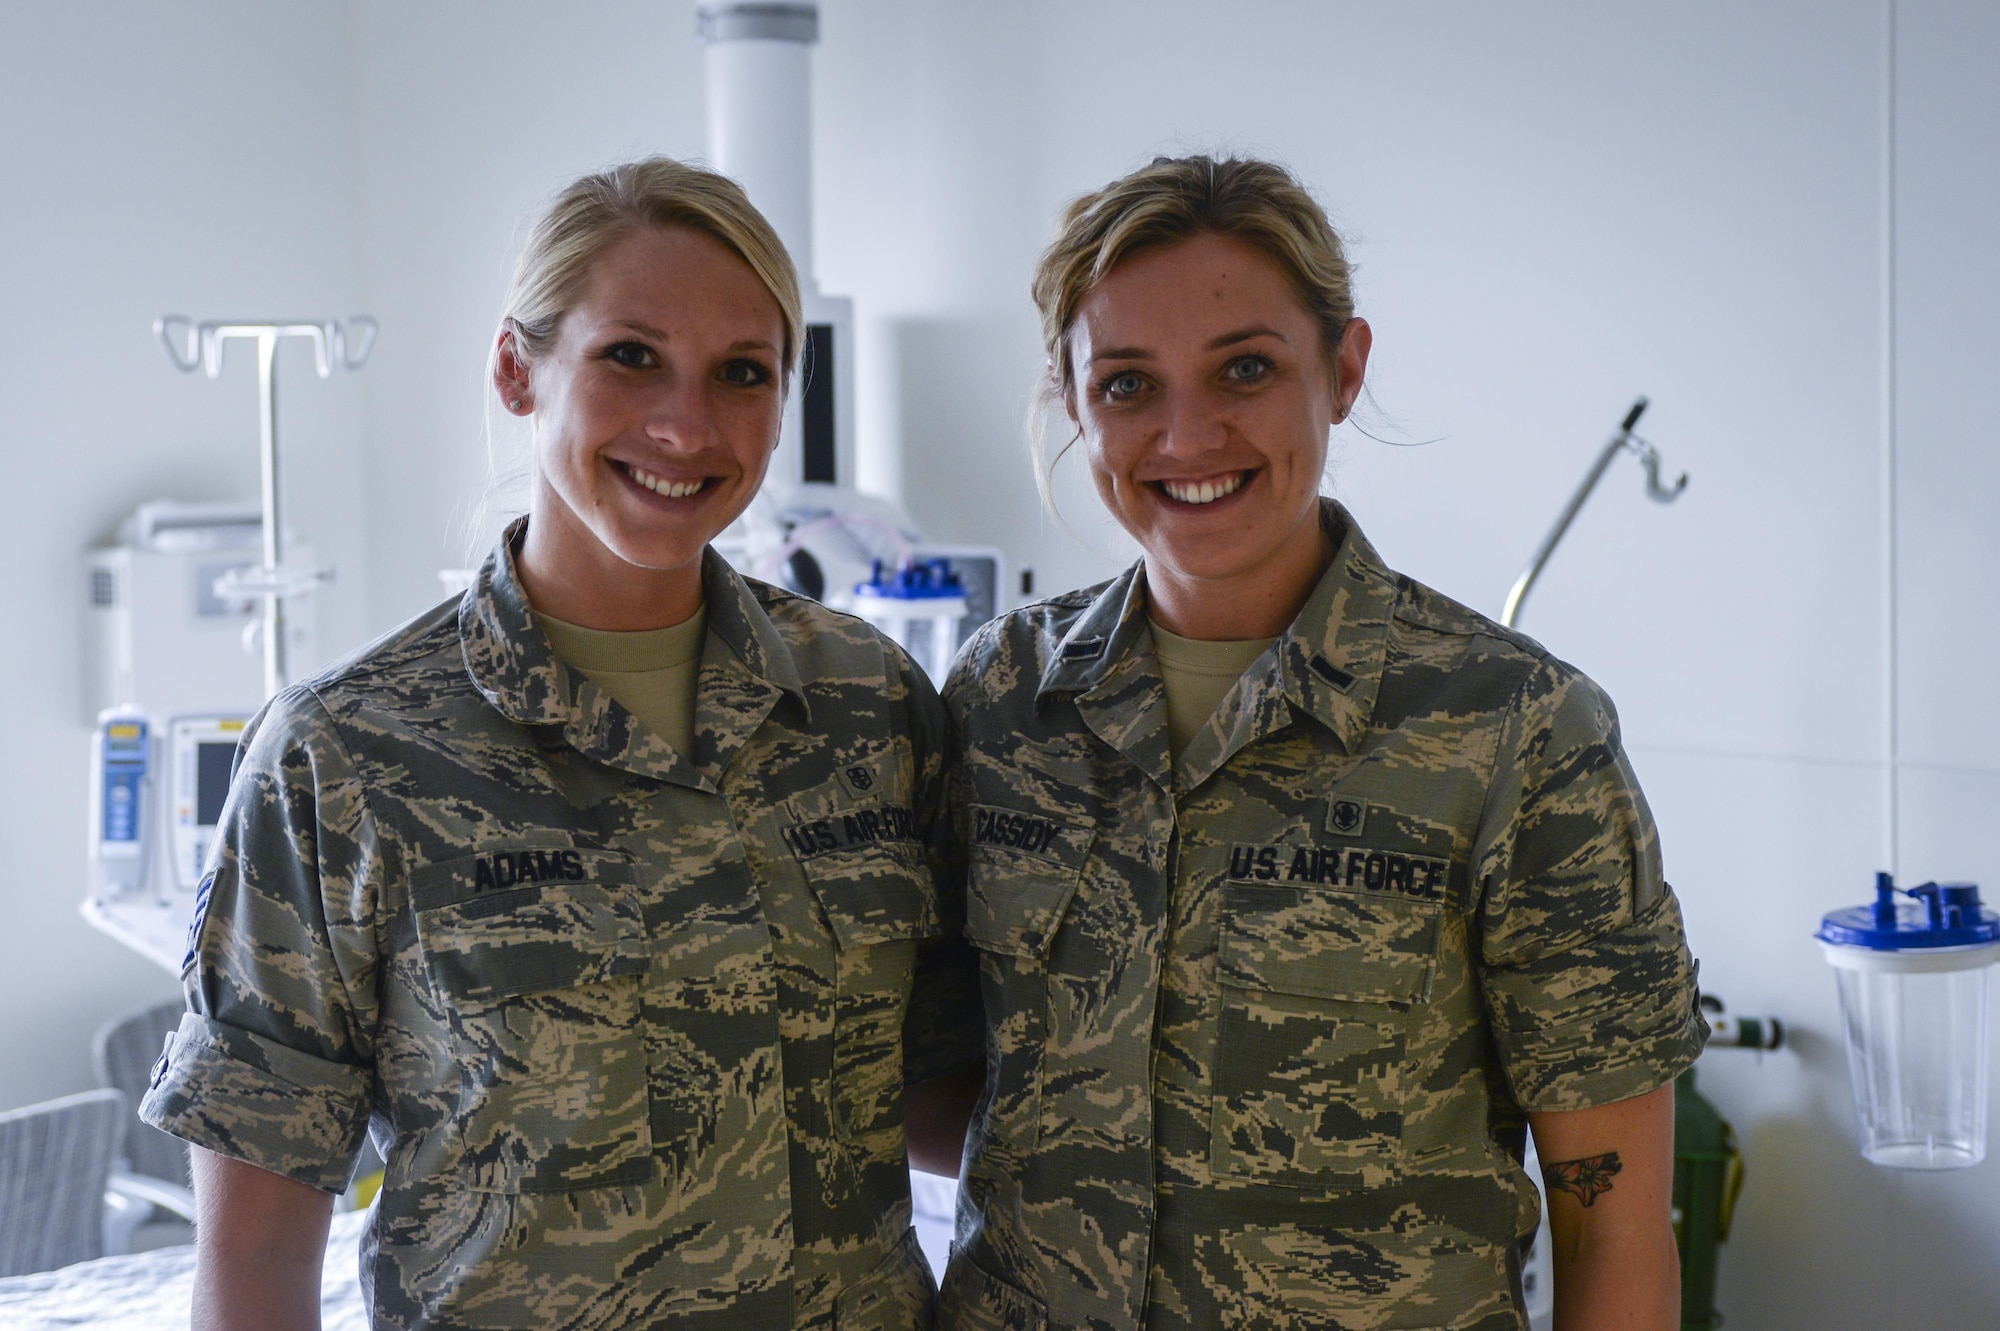 Staff Sgt. Rebekah Adams (left), 99th Inpatient Operations Squadron critical care technician, and 1st Lt. Elizabeth Cassidy (right), 99th Surgical Operations Squadron Post Anesthesia Care Unit nurse, pose for a picture at the Mike O’Callaghan Federal Medical Center at Nellis Air Force Base, Nev., April 28. On May 6 Nellis AFB began a week-long celebration for Nurse and Medical Technician Appreciation Week to recognize the contributions nurses and technicians make to healthcare. (U.S. Air Force photo by Airman 1st Class Nathan Byrnes)